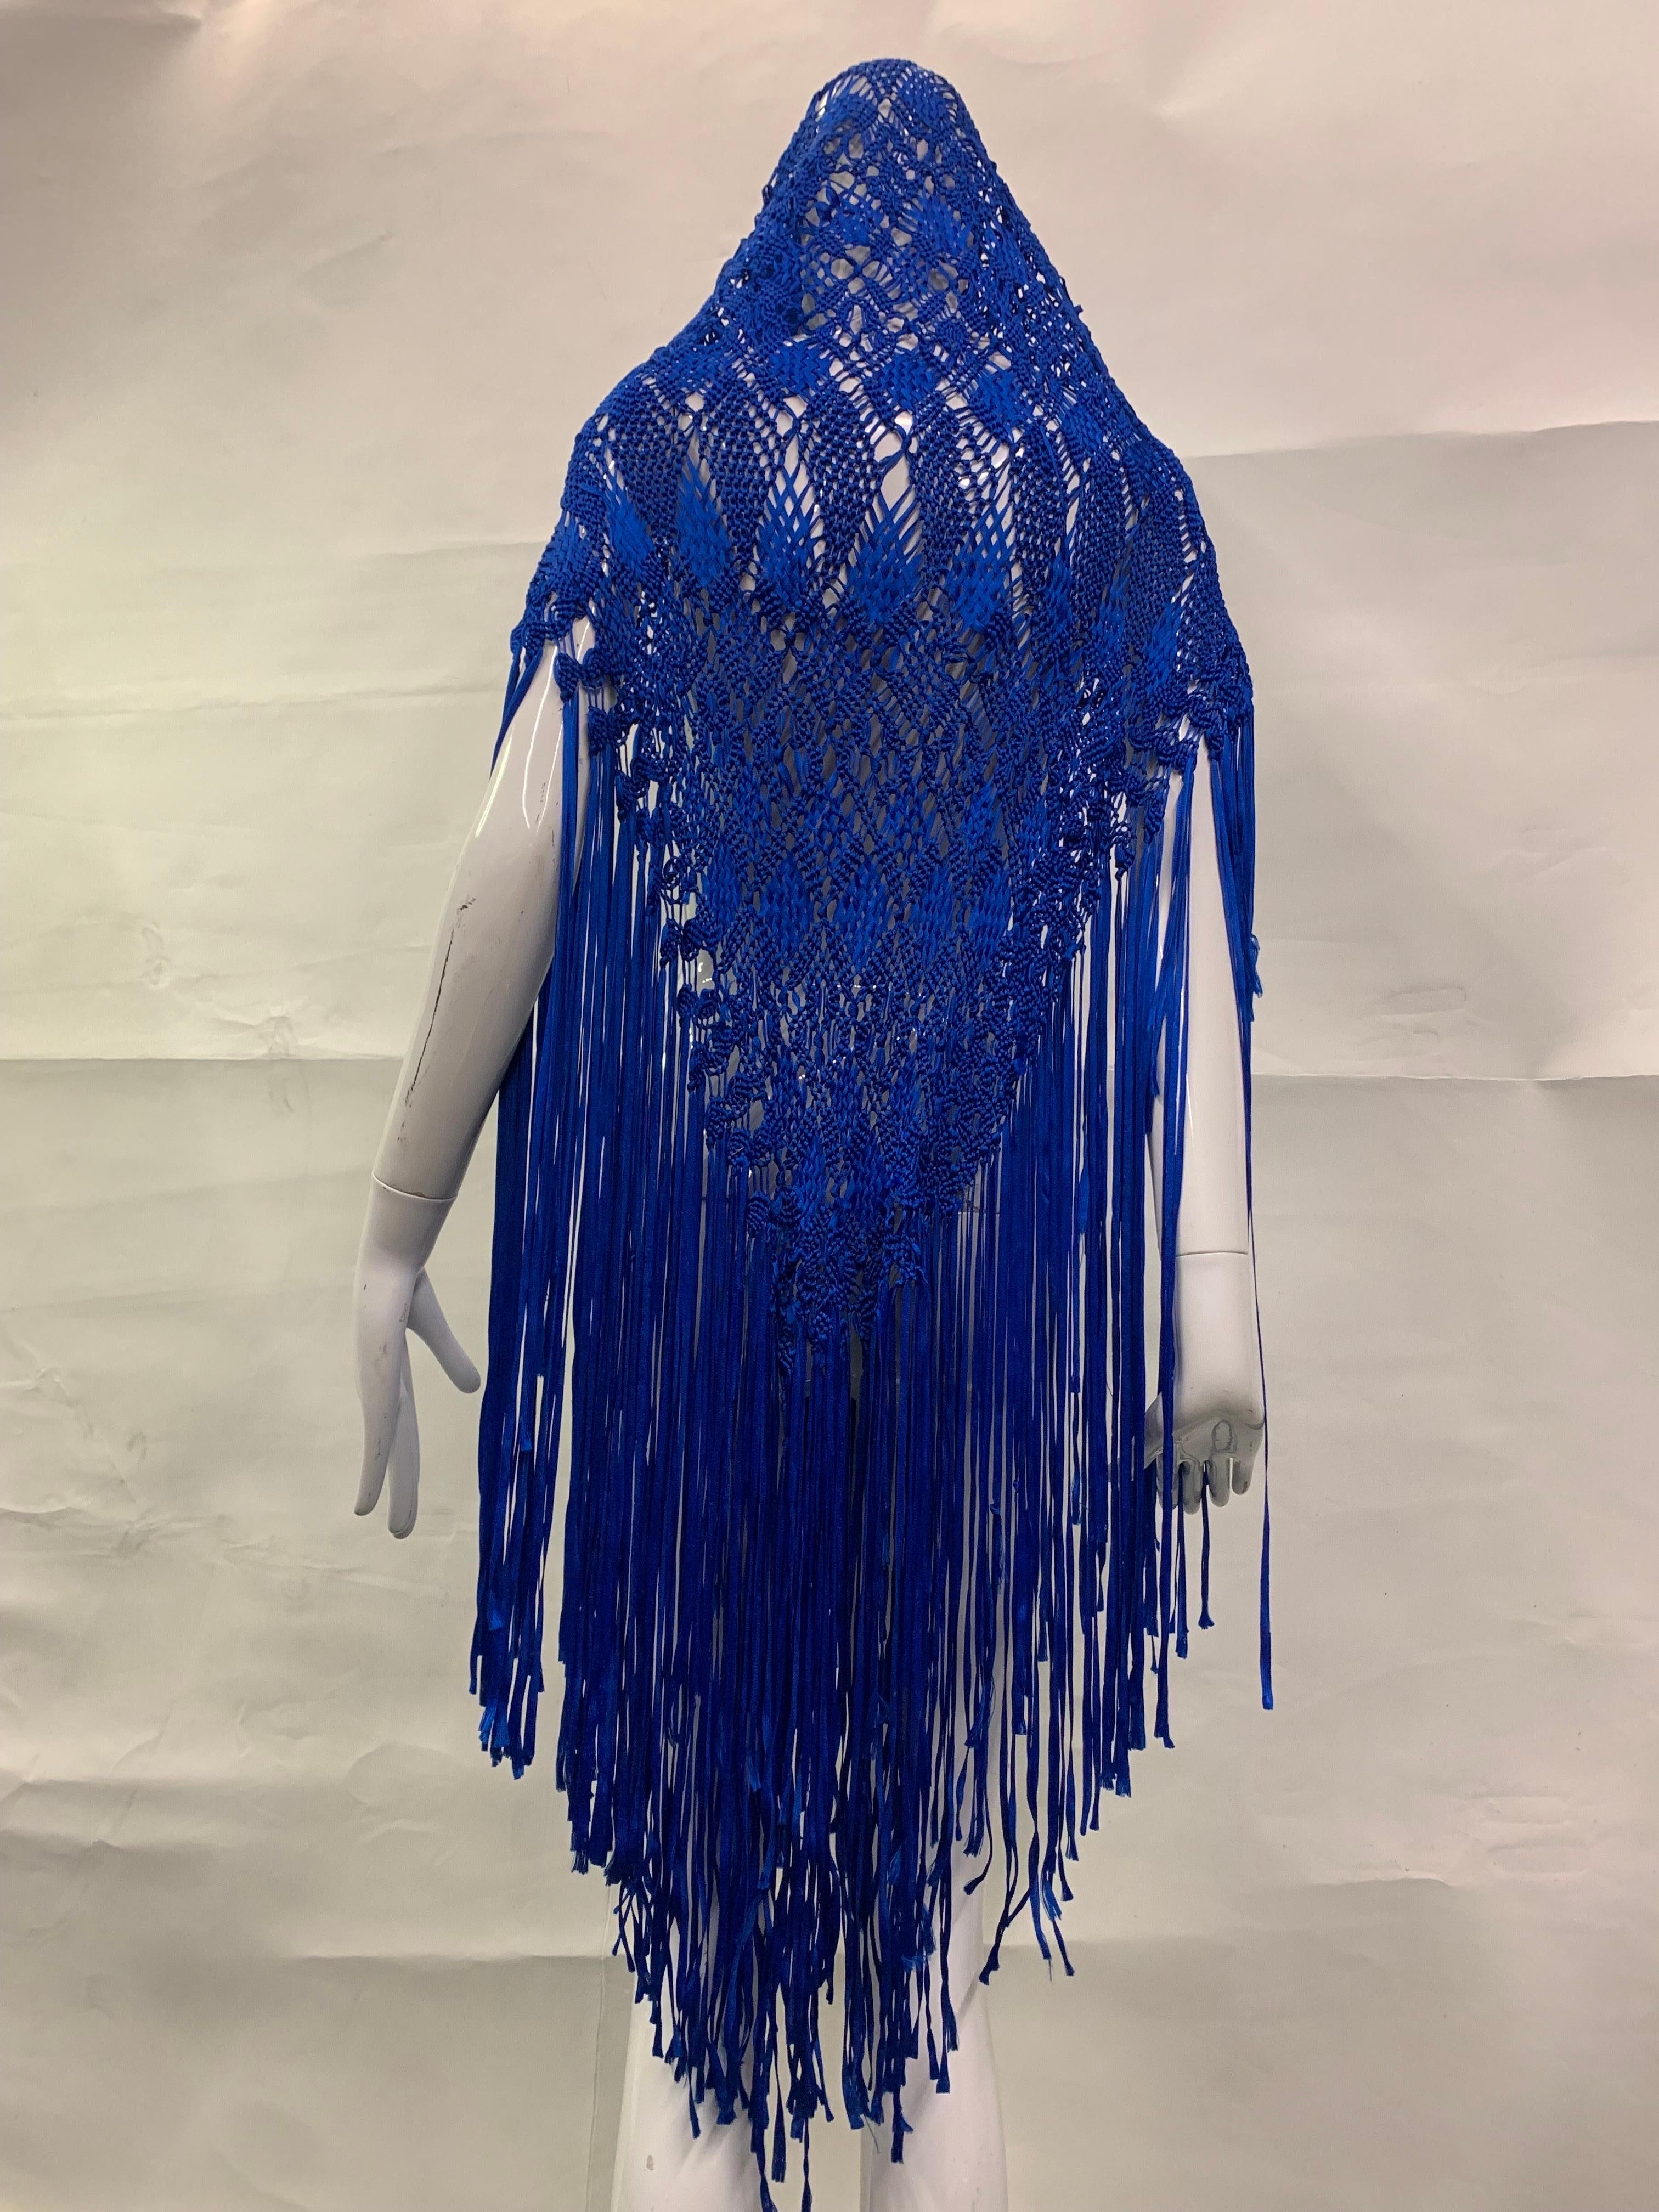 1970s Cobalt Blue Rayon Ribbon Macrame Shawl with Extravagant Fringe In Excellent Condition For Sale In Gresham, OR